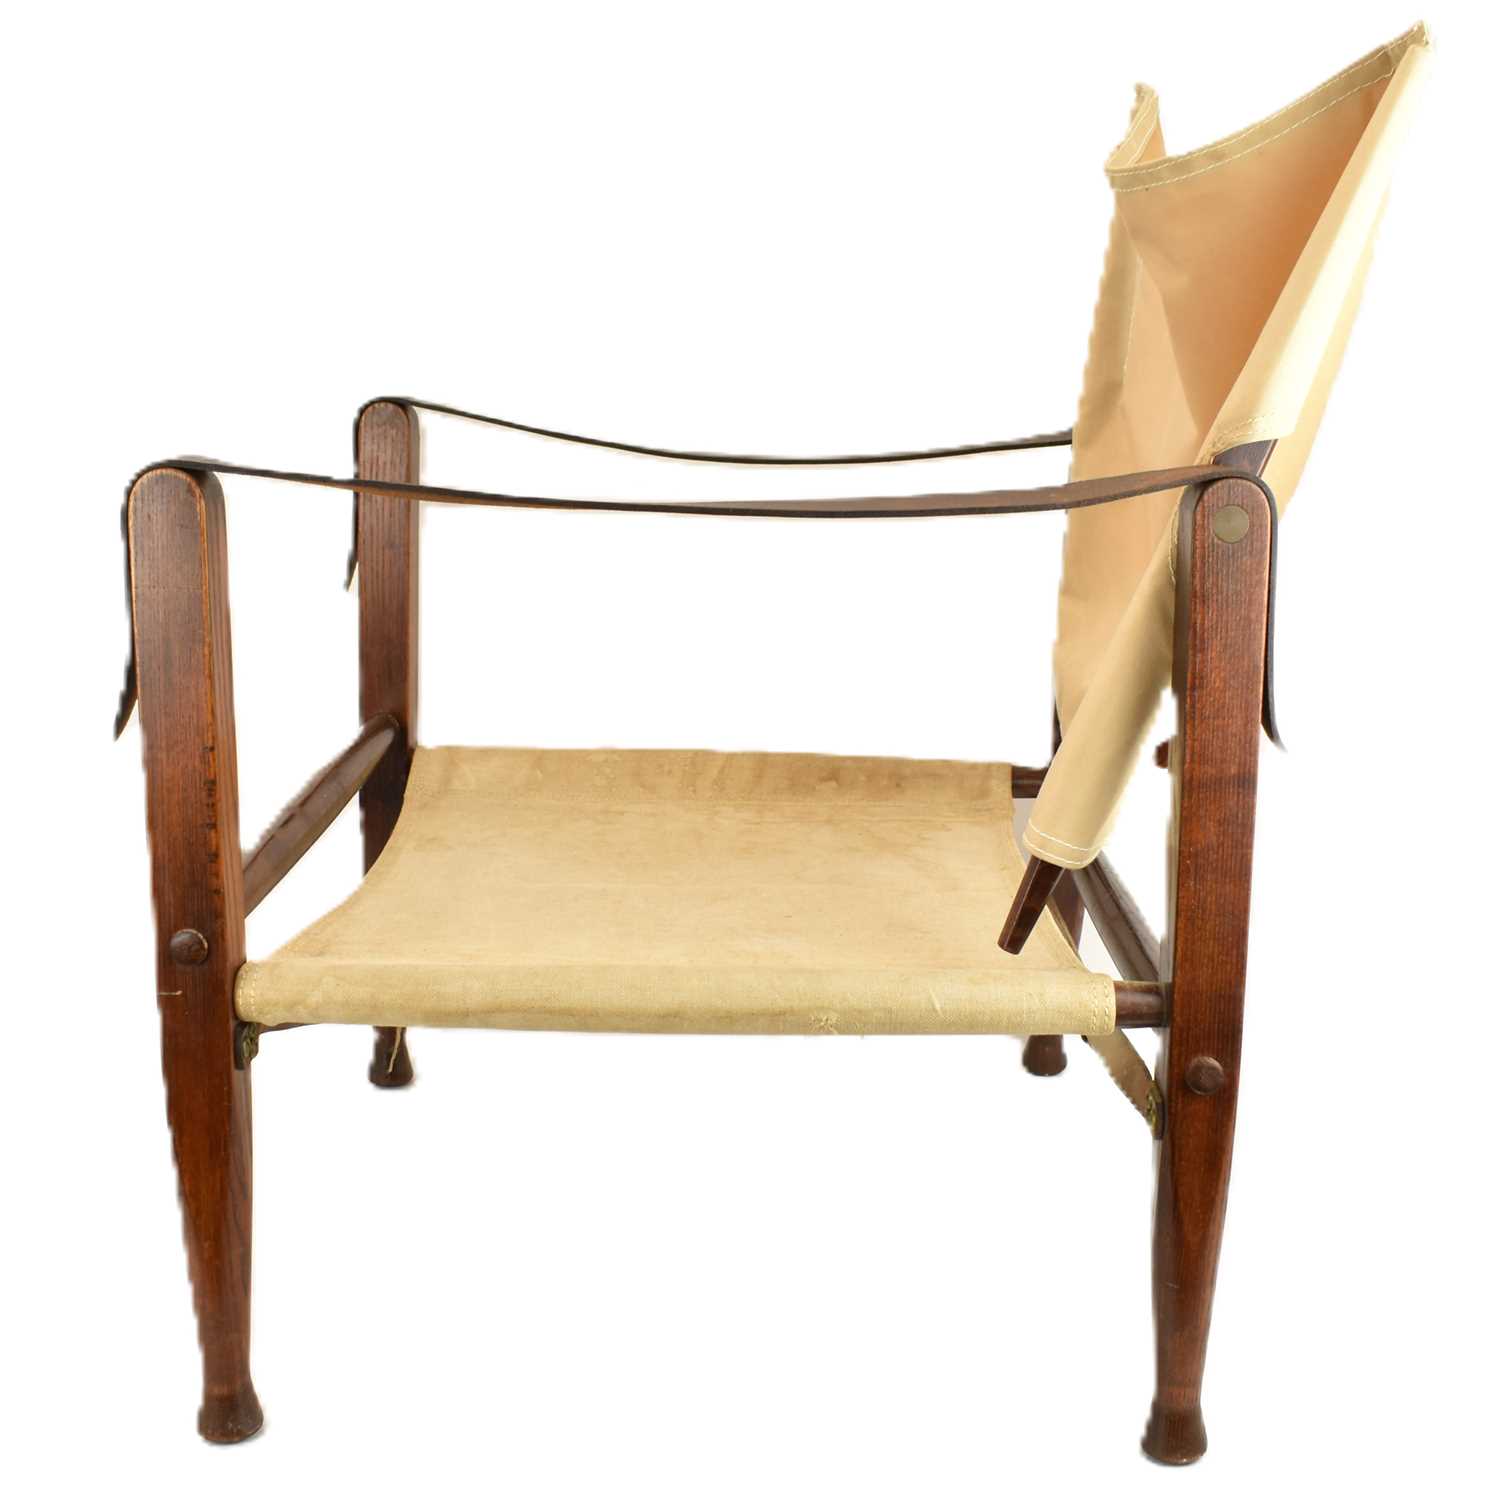 KAARE KLINT, DENMARK; a pair of ash and canvas safari chairs, marked 'Denmark 25160' to back - Image 6 of 7